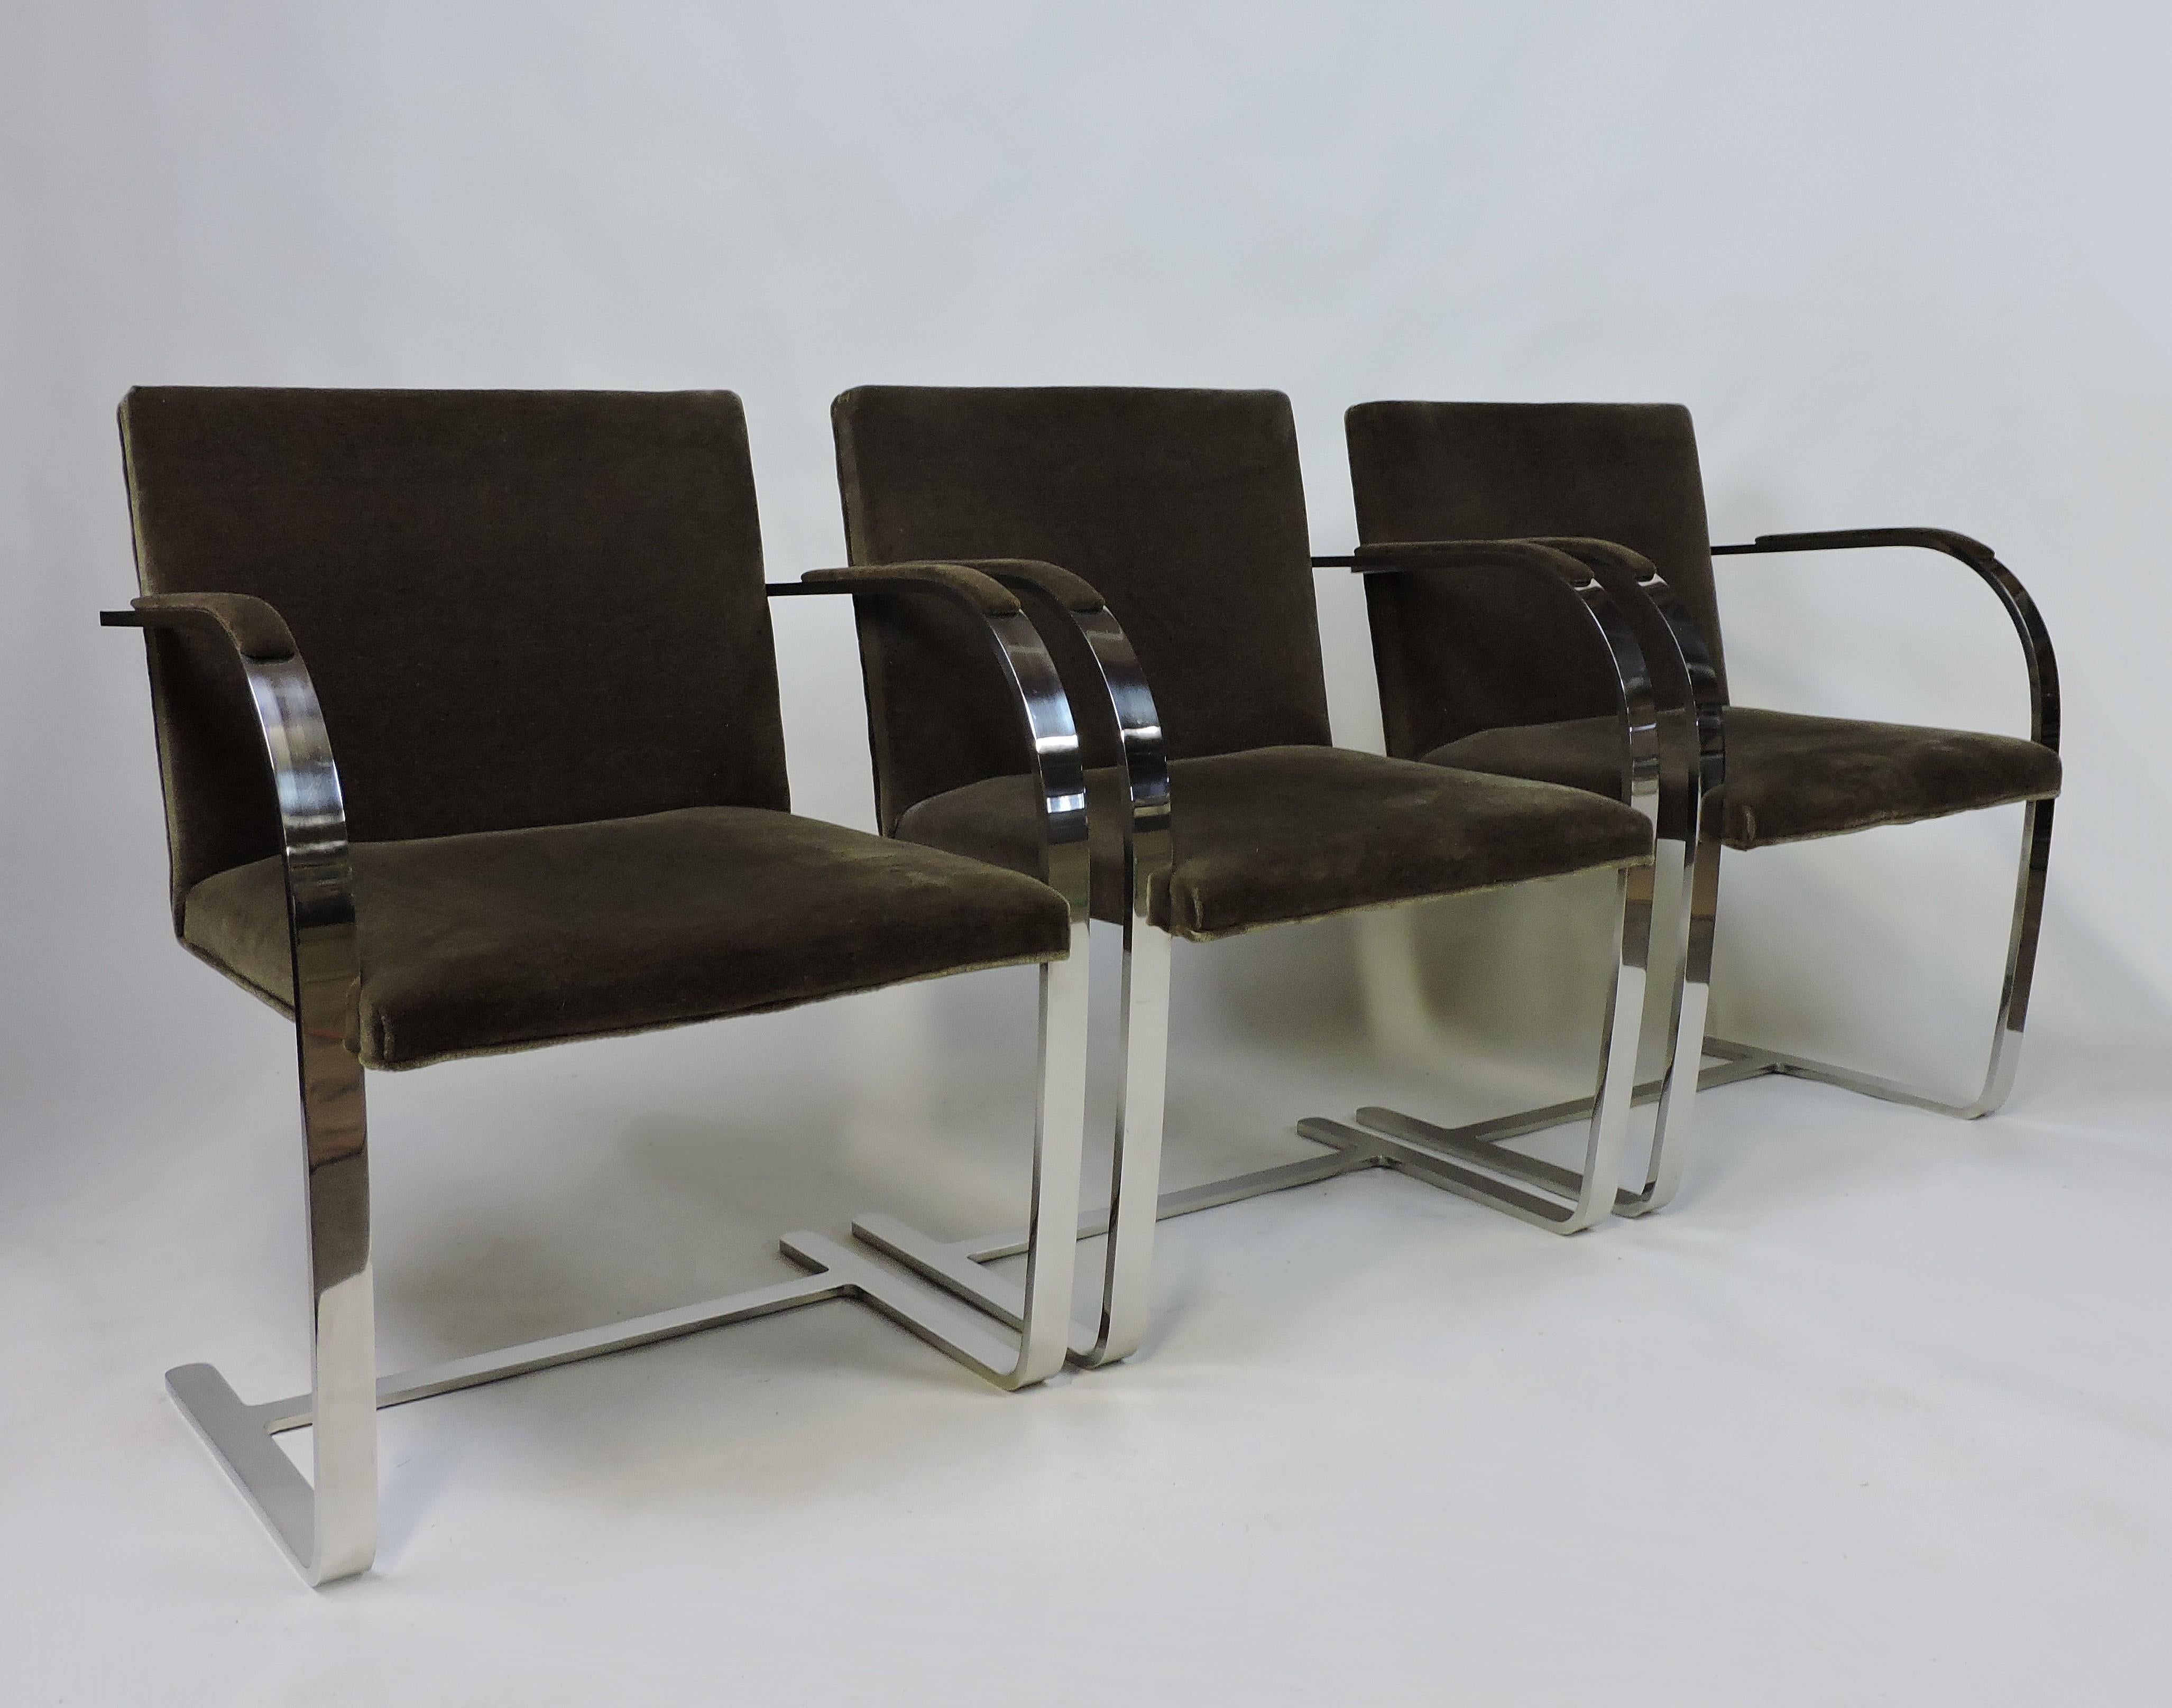 Polished Mies van der Rohe for Knoll Brno Flat Bar Stainless Steel Chair, 3 Available